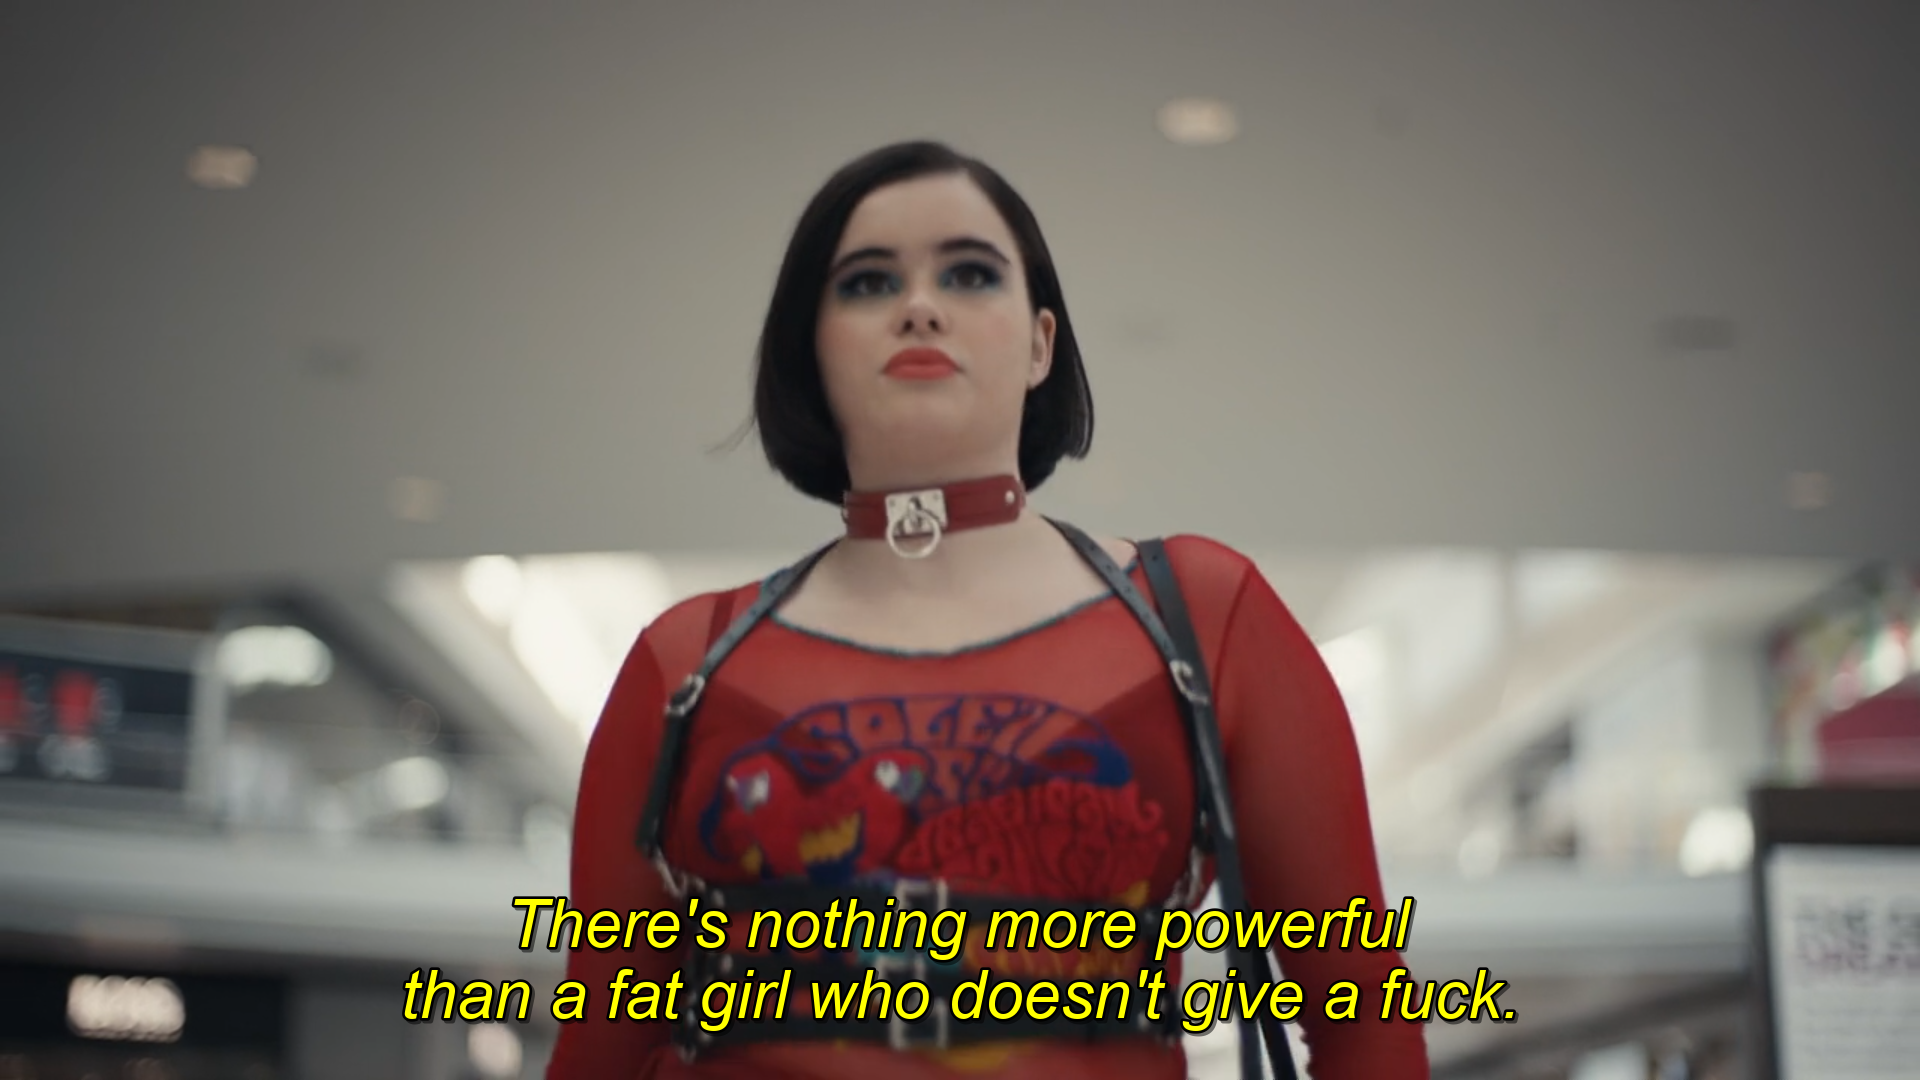 Theres Nothing More Powerful Than A Fat Girl That Doesnt Give a F***”